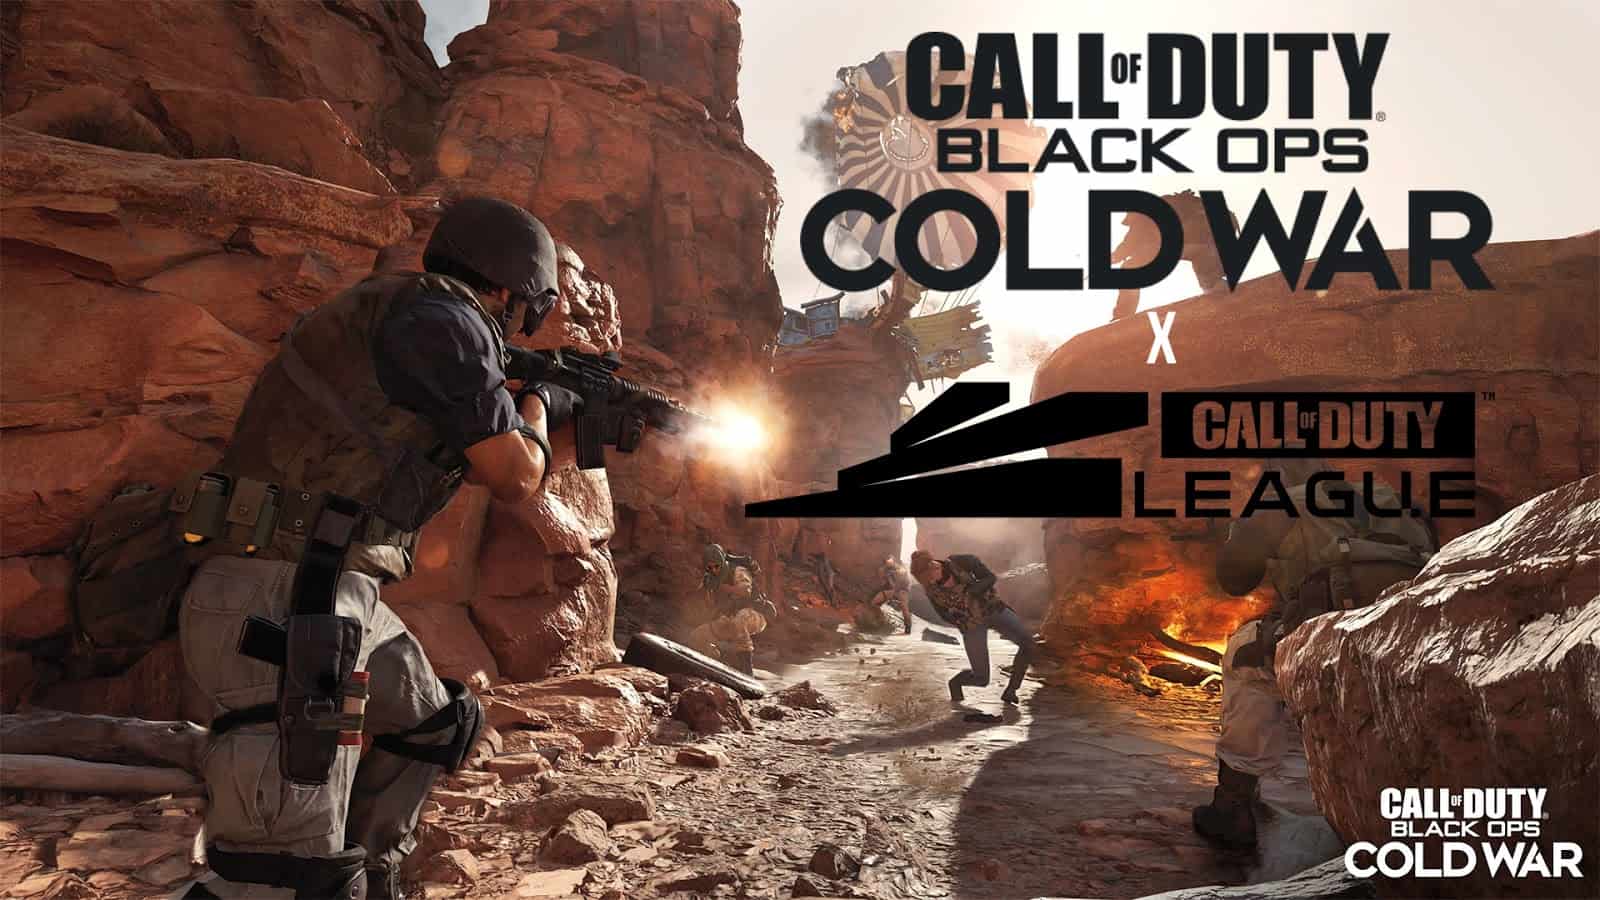 Call of Duty League To Host Black Ops Cold War Launch Week Tournaments